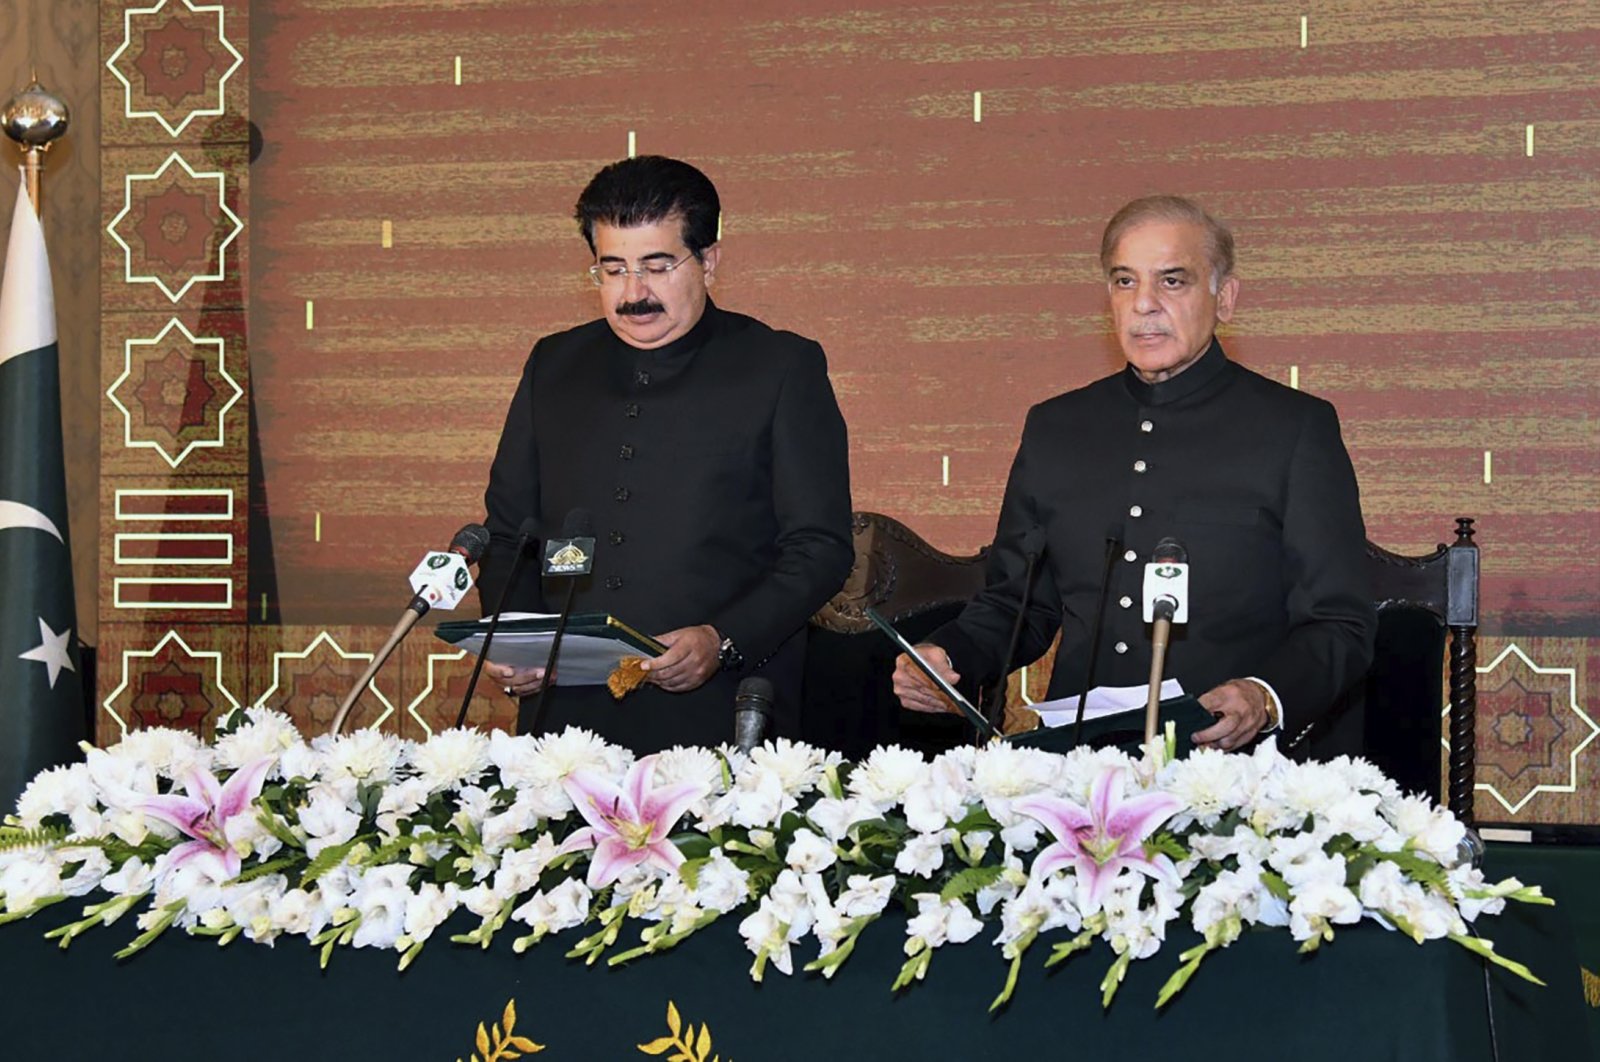 President of Pakistan&#039;s Senate Sadiq Sanjrani (L) administers the oath of office to newly-elected Pakistani Prime Minister Shahbaz Sharif during a ceremony at Presidential Palace, in Islamabad, Pakistan, April 11, 2022. (Press Information Department via AP)